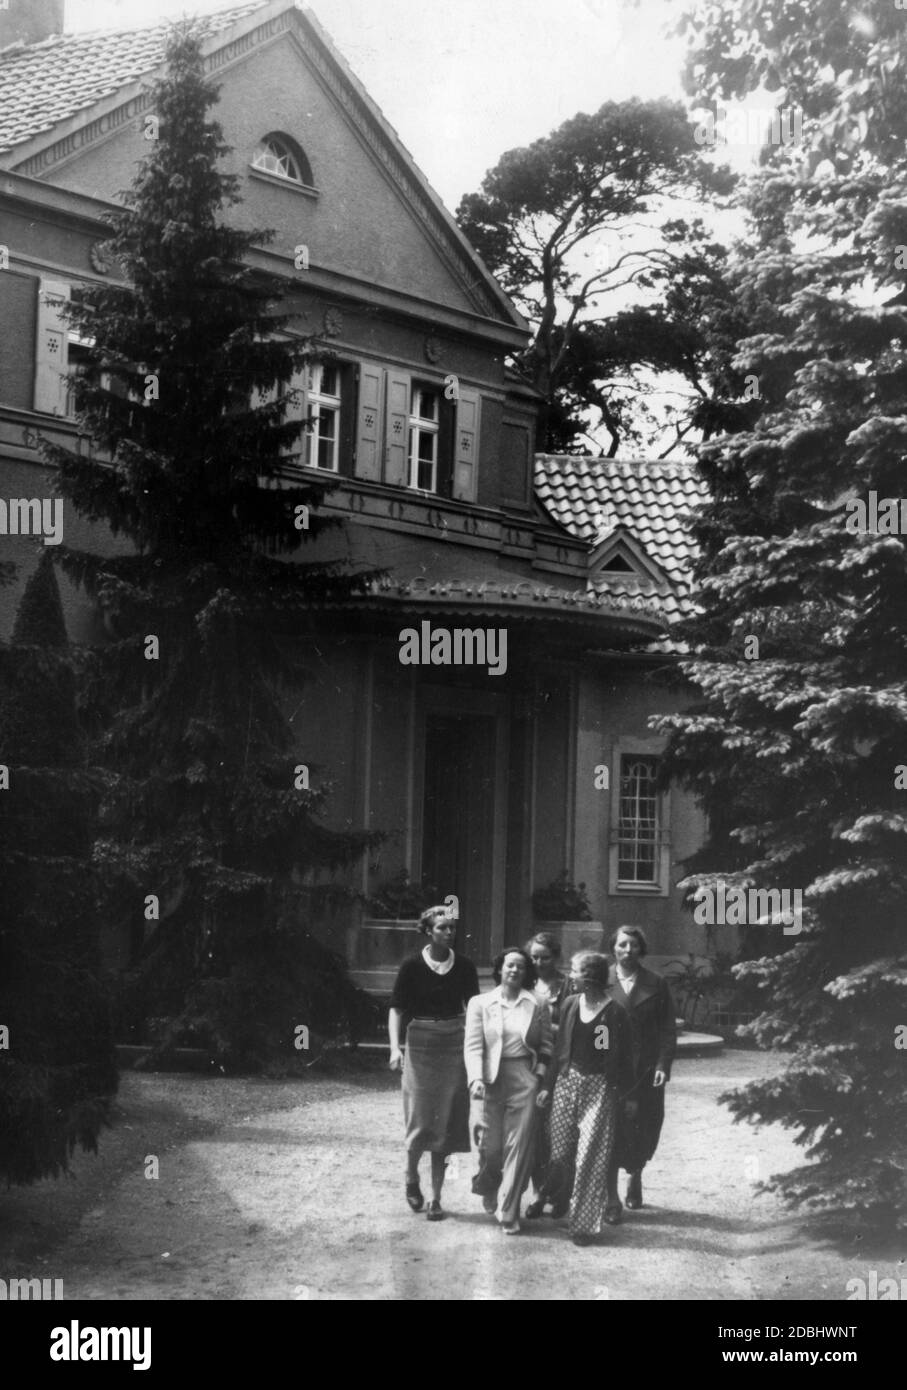 'View of the house and participants of the Reichsbraeuteschule (''Reich Bridal School'') on Schwanenwerder. The school educates SS, SA and Wehrmacht members in home economics, educational issues, baby care, home design, etc. Undated photo.' Stock Photo